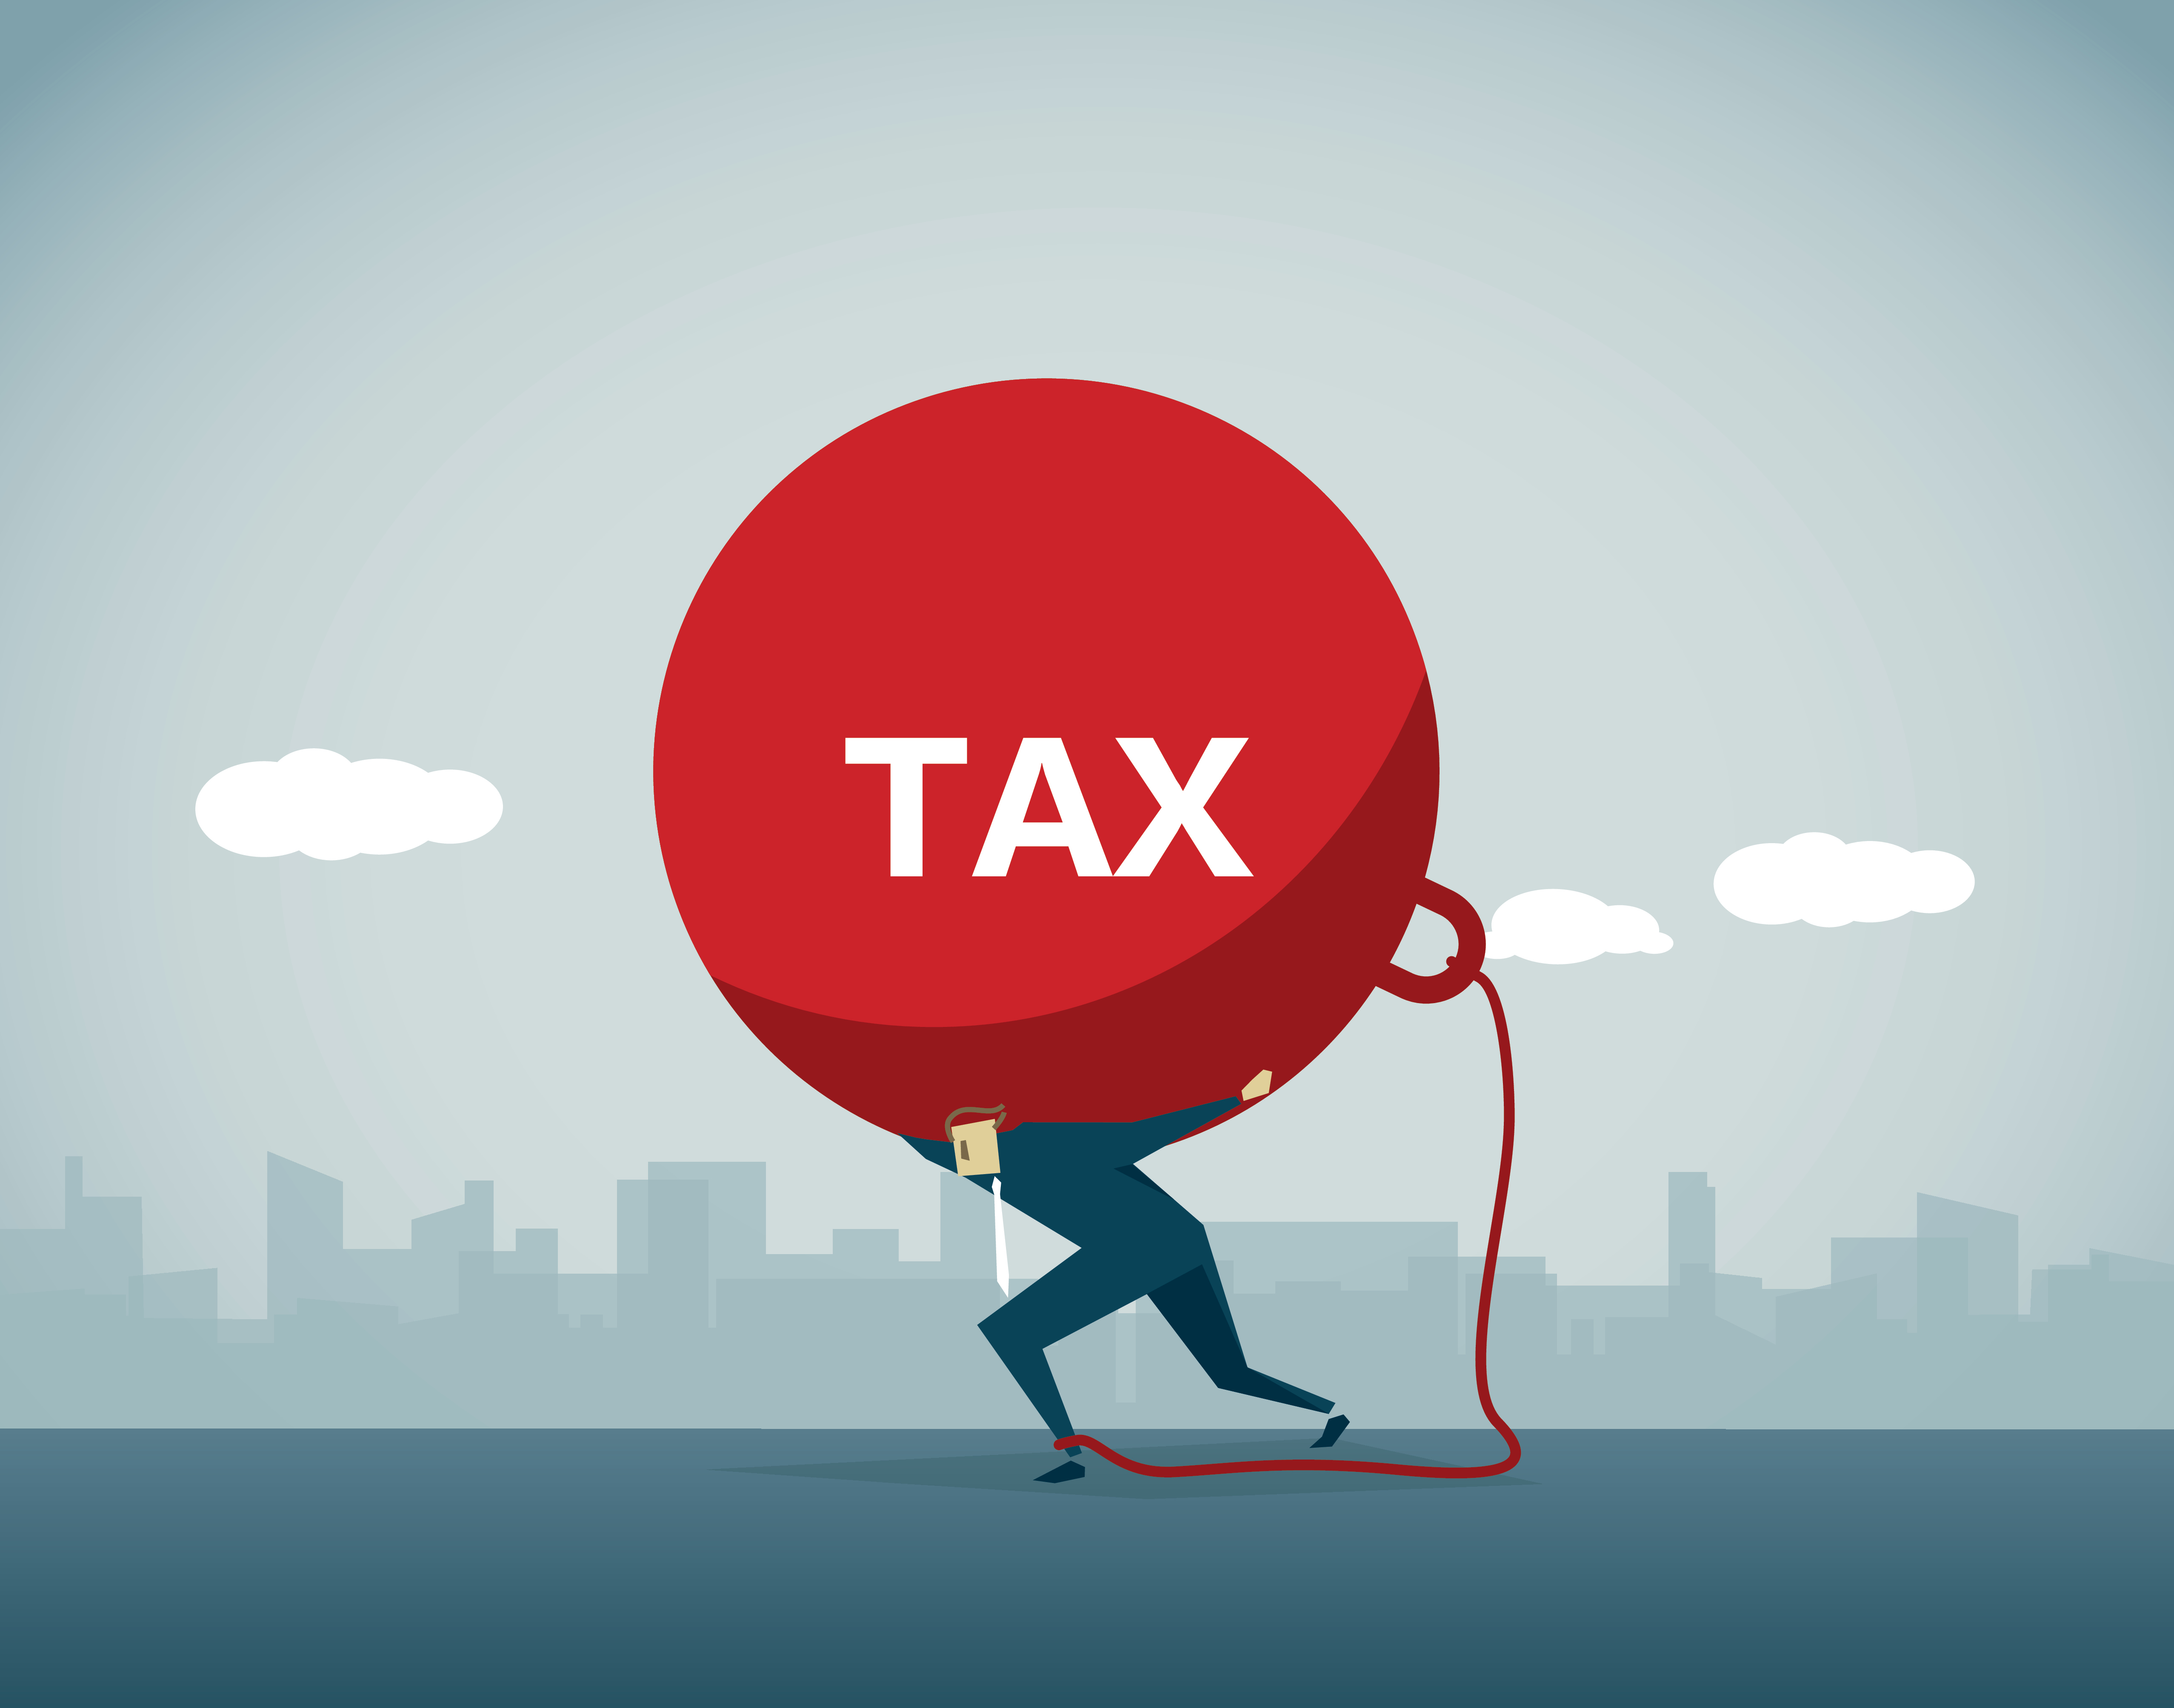 Making tax-wise decisions delivers you $ savings